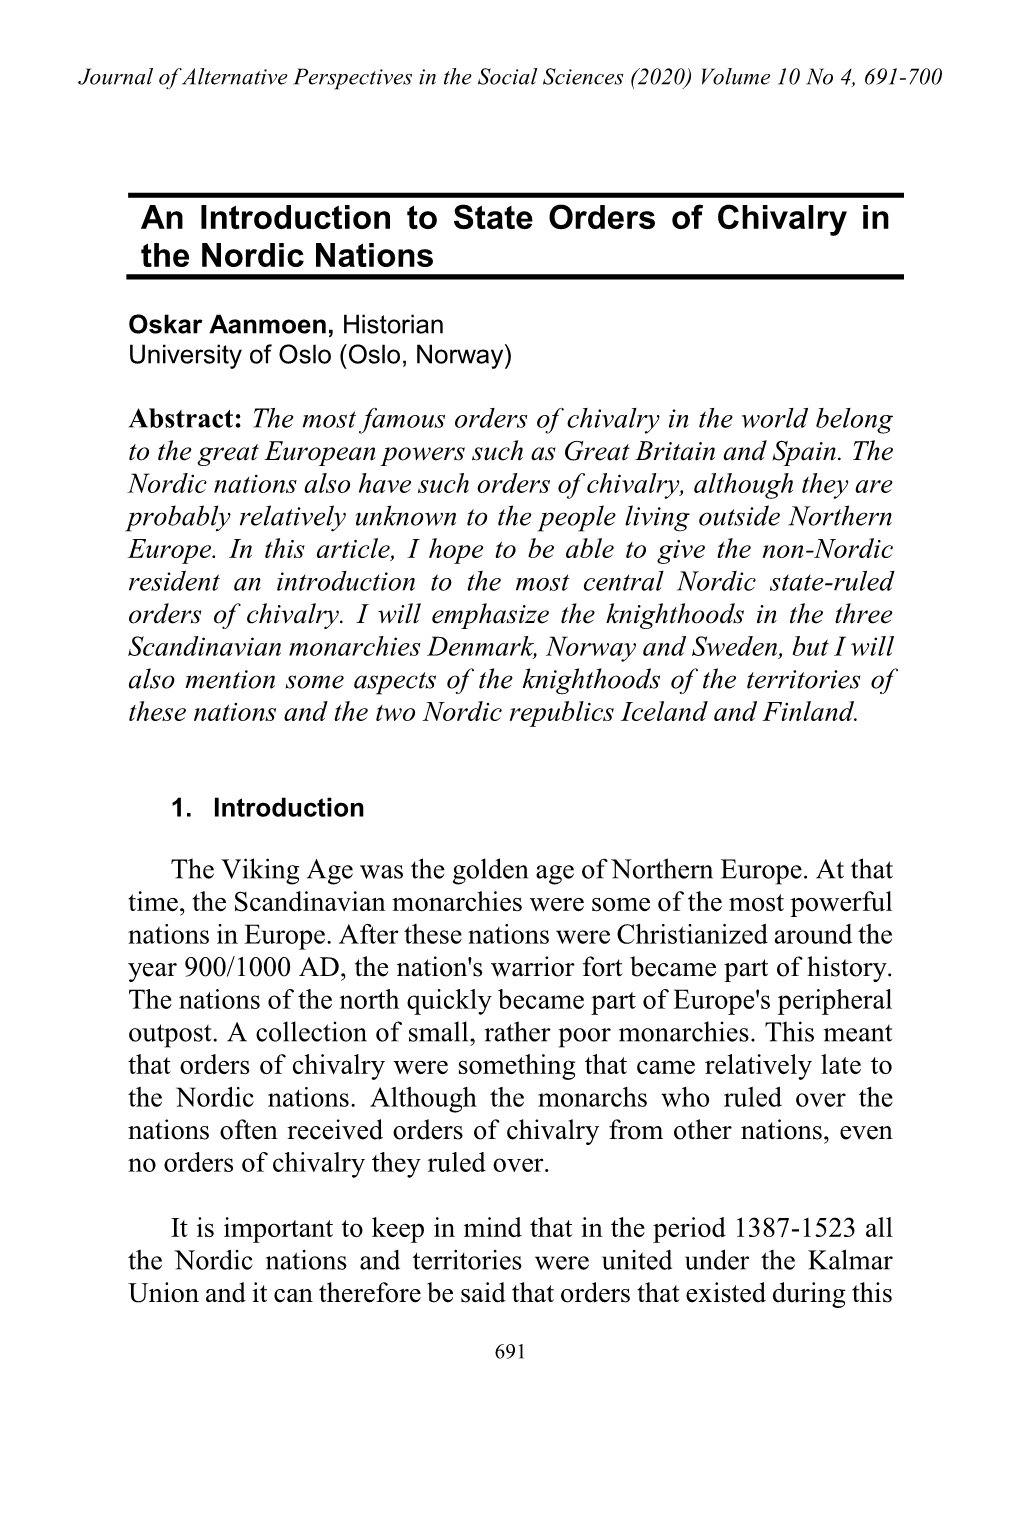 An Introduction to State Orders of Chivalry in the Nordic Nations